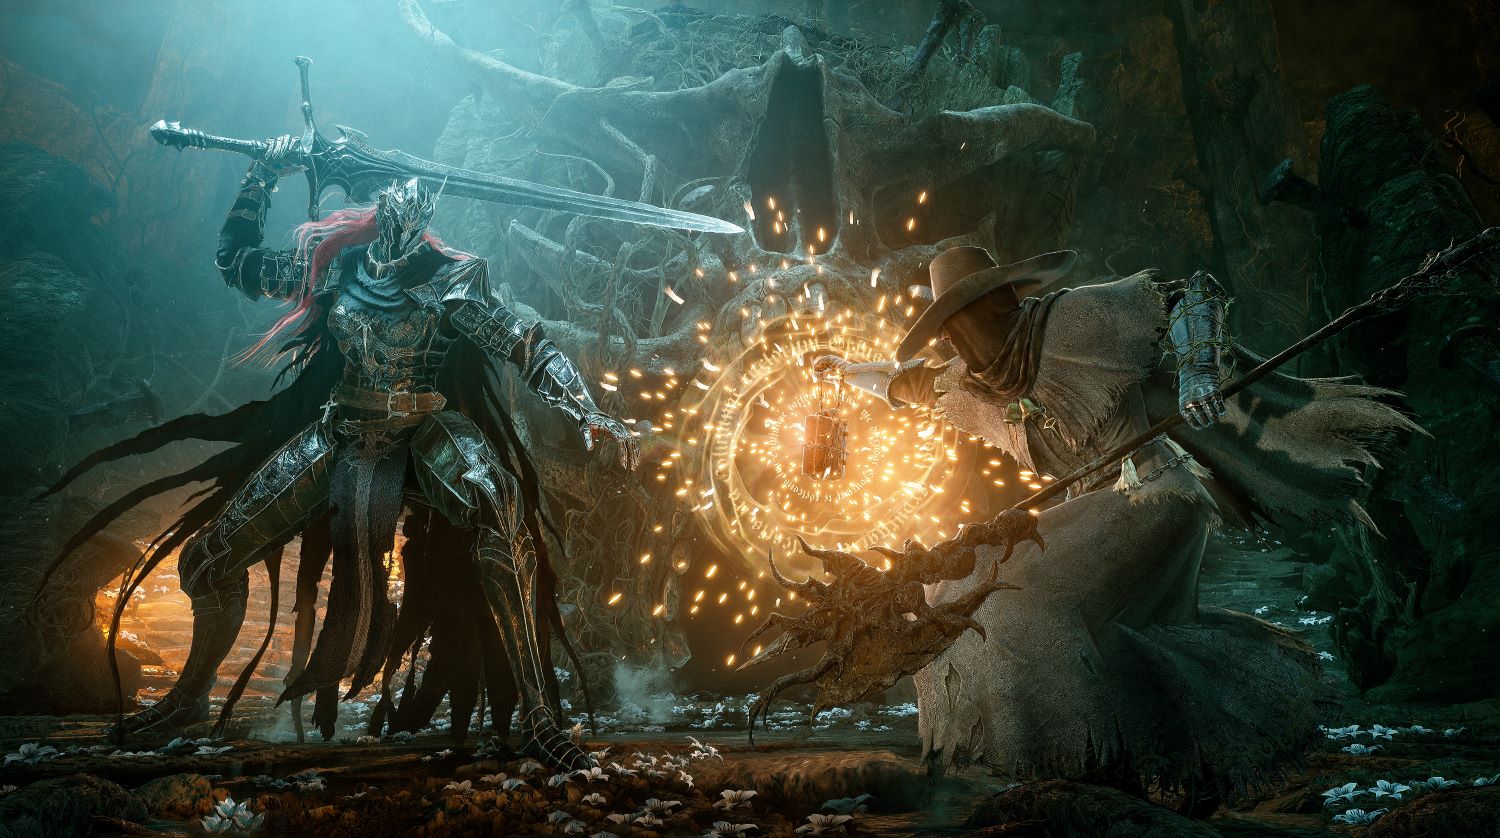 5 Best Starter Weapons in Lords of the Fallen, Lords of the Fallen  Gameplay, Trailer and More - News